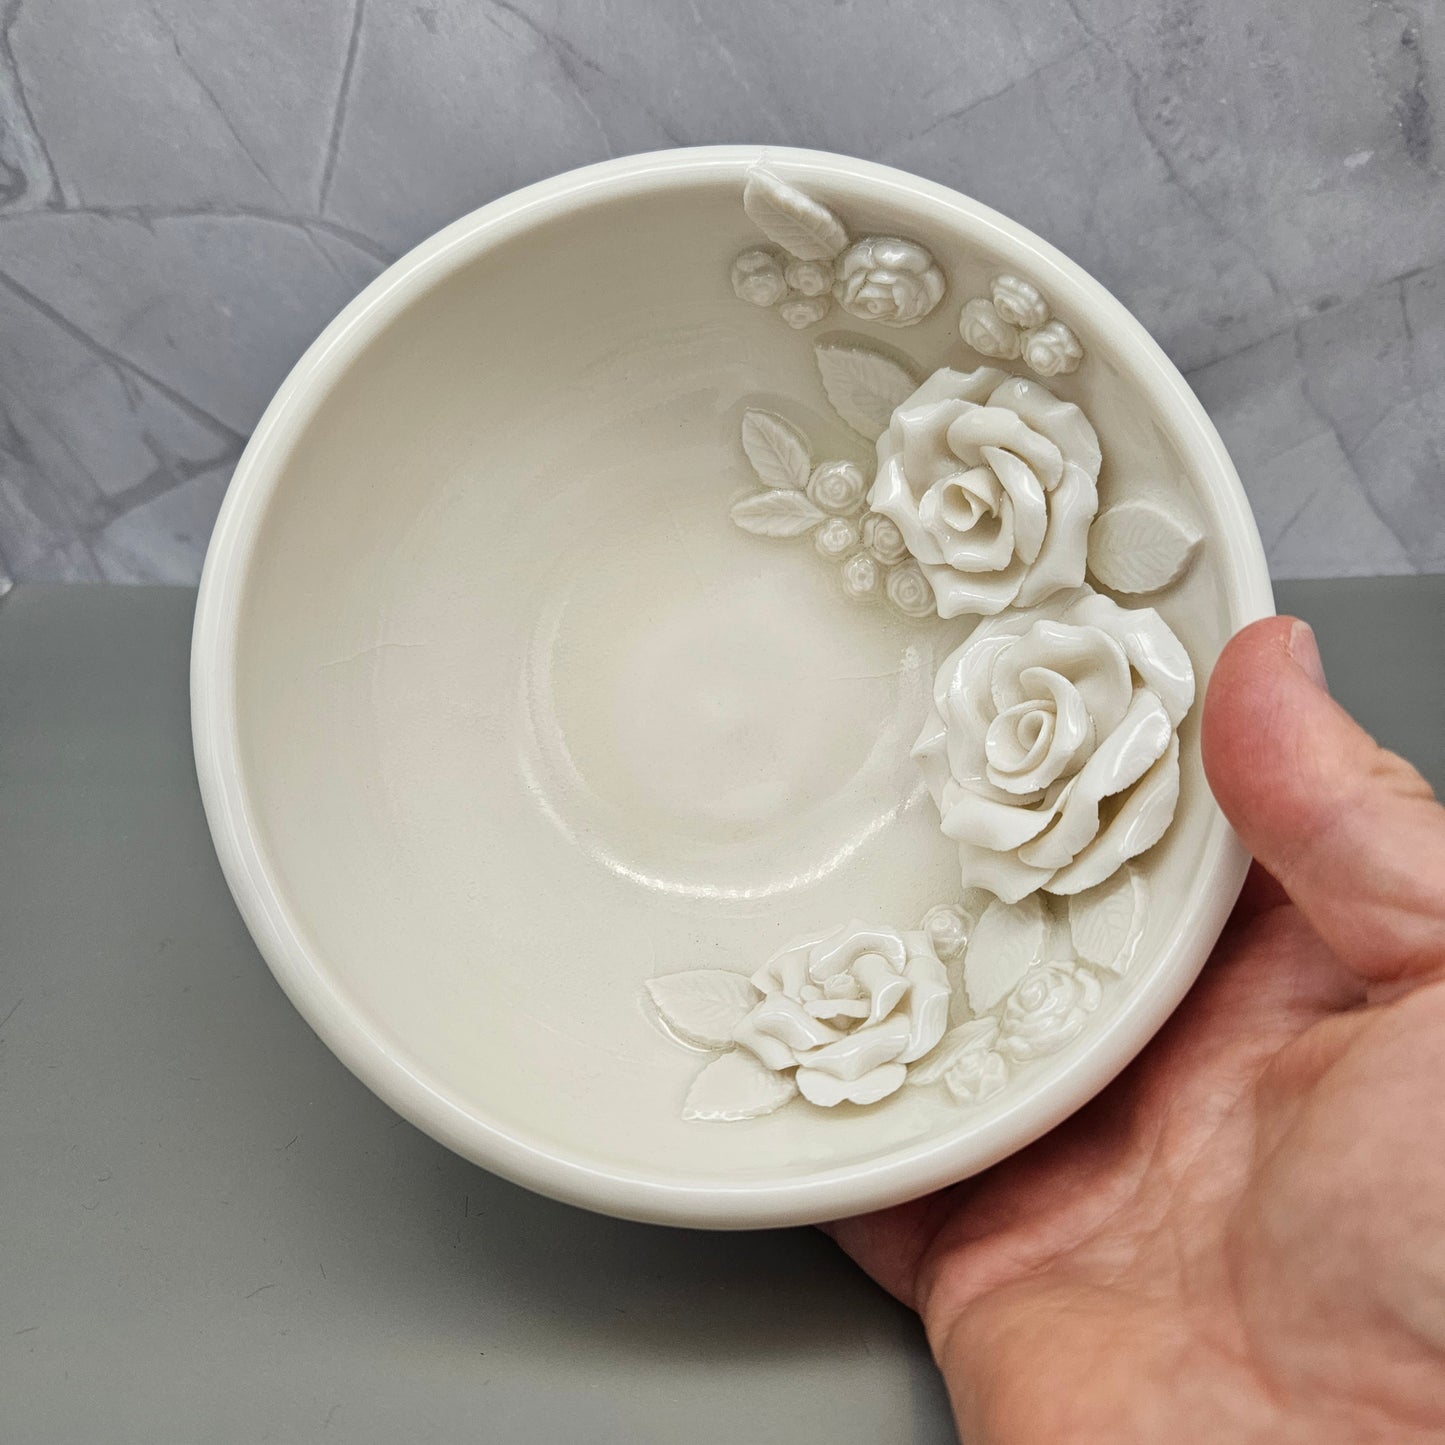 White frost shallow bowl with roses within the bowl. 6 inches wide, 3 inches deep.